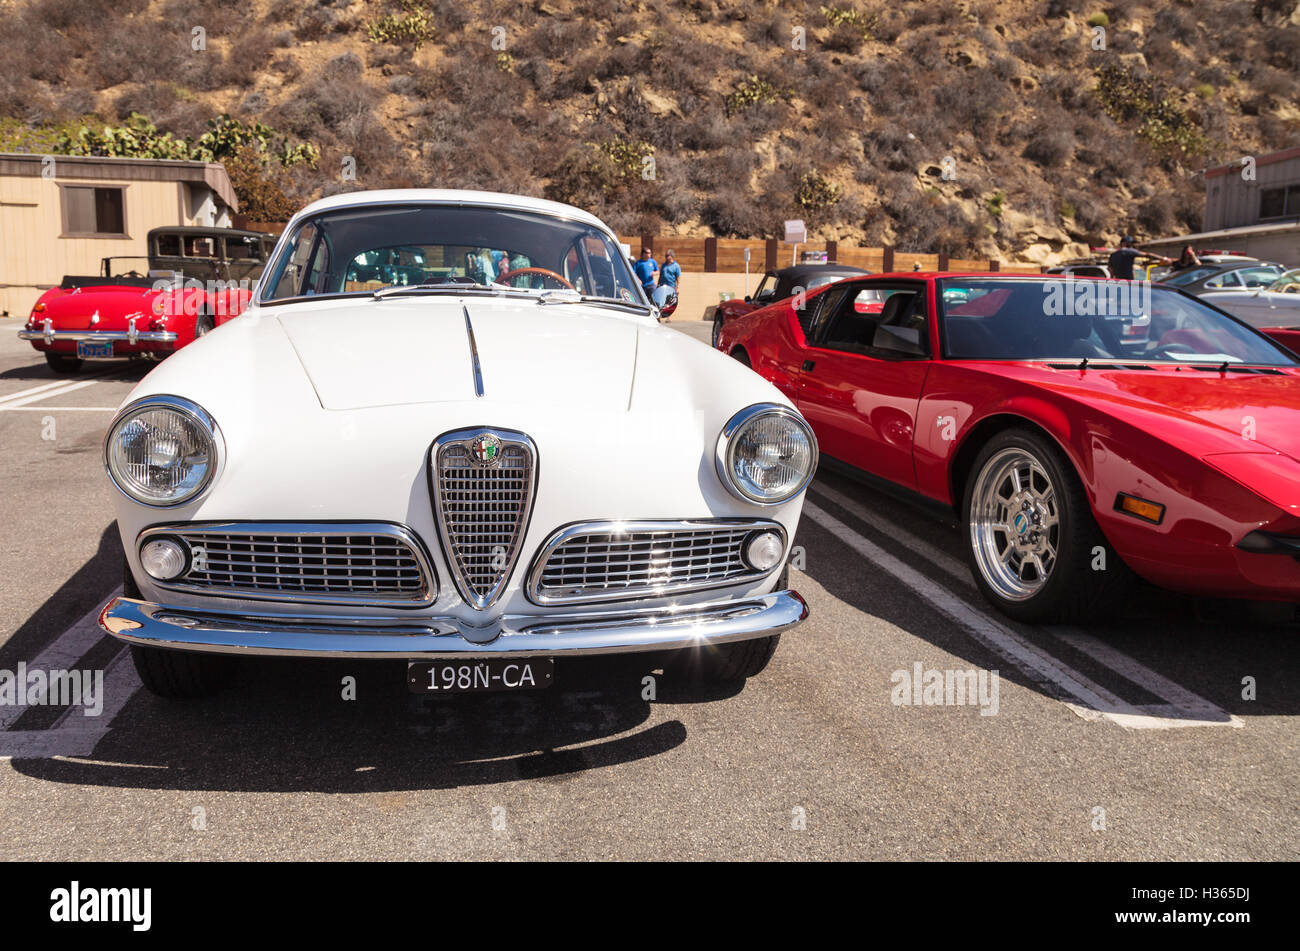 Laguna Beach, CA, USA - October 2, 2016: White 1959 Alfa Romeo Givlietta Sprint owned by Ahmet Tuncay and displayed at the Rotar Stock Photo